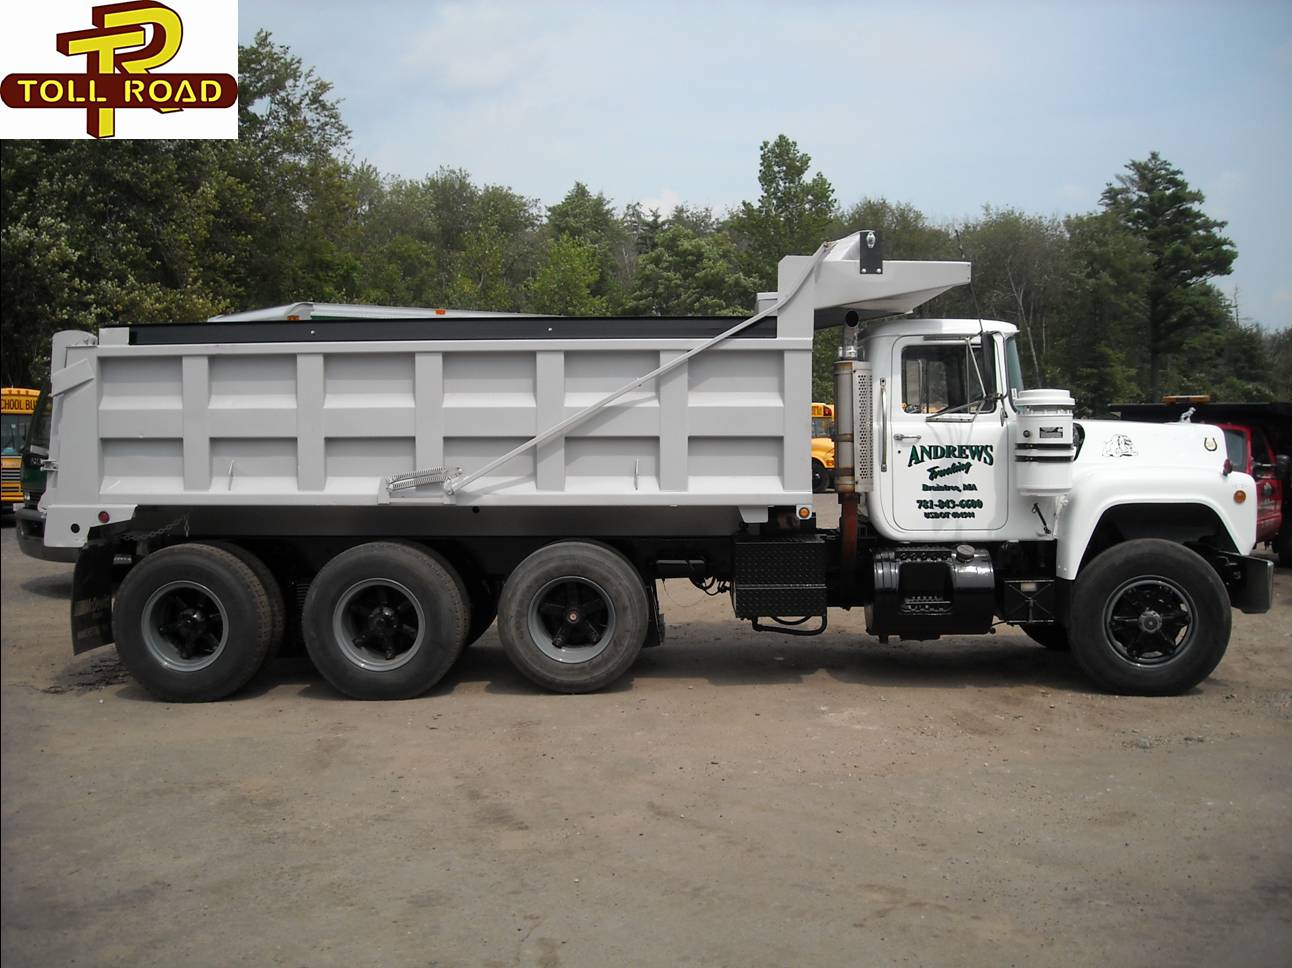 Toll Road Extreme Duty Dump Body